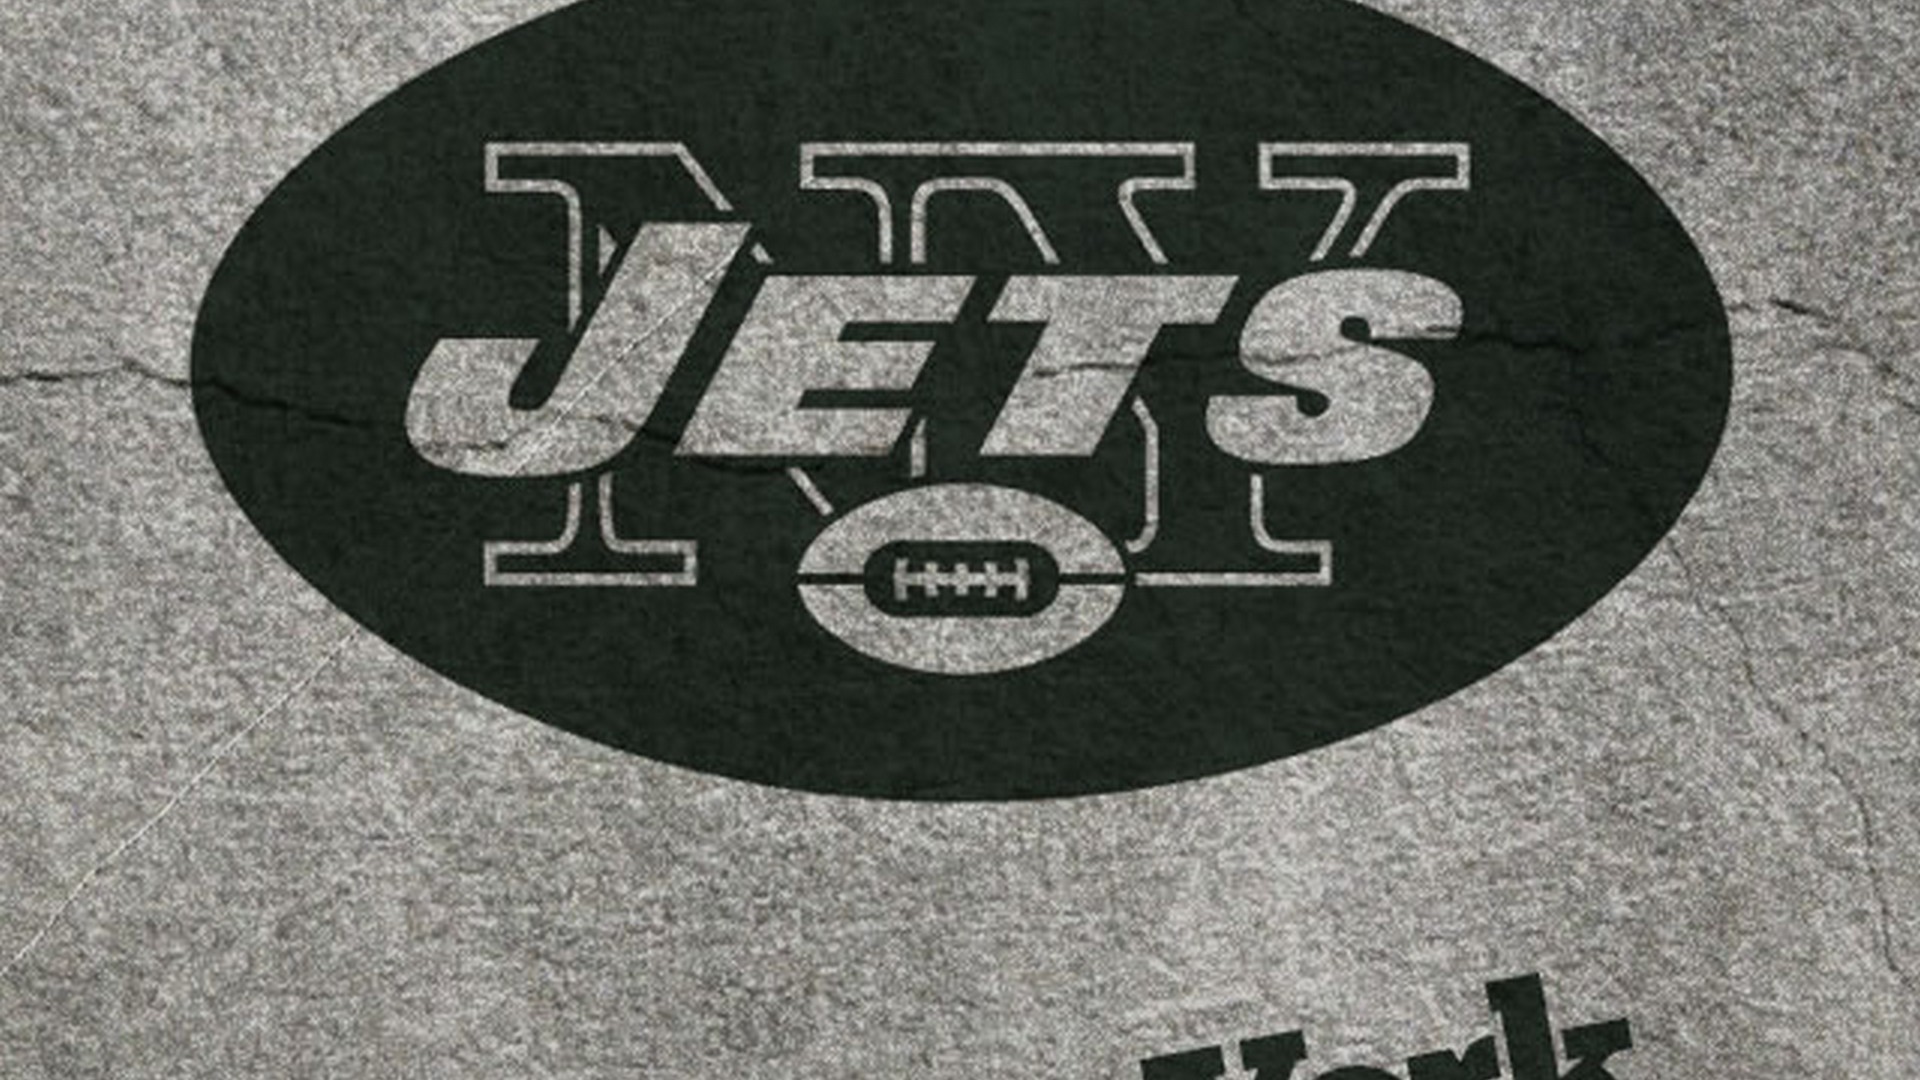 1920x1080 New York Jets Wallpaper For Mac Backgrounds with resolution   pixel. You can make this